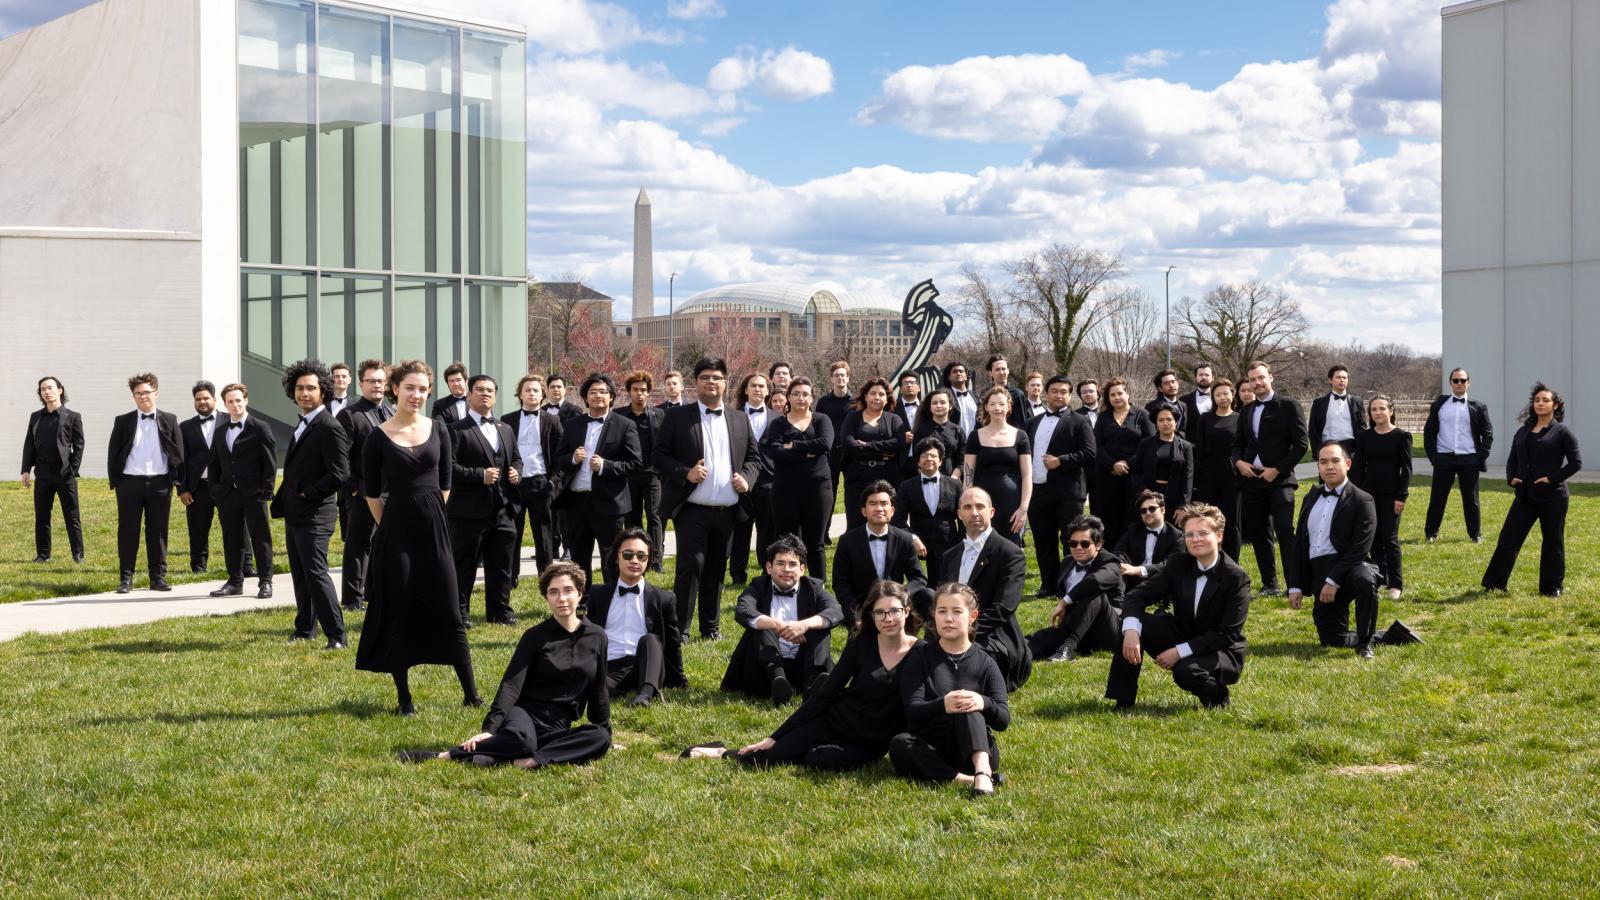 CSULB Wind Symphony Members pose on a grass lawn in Washington D.C.